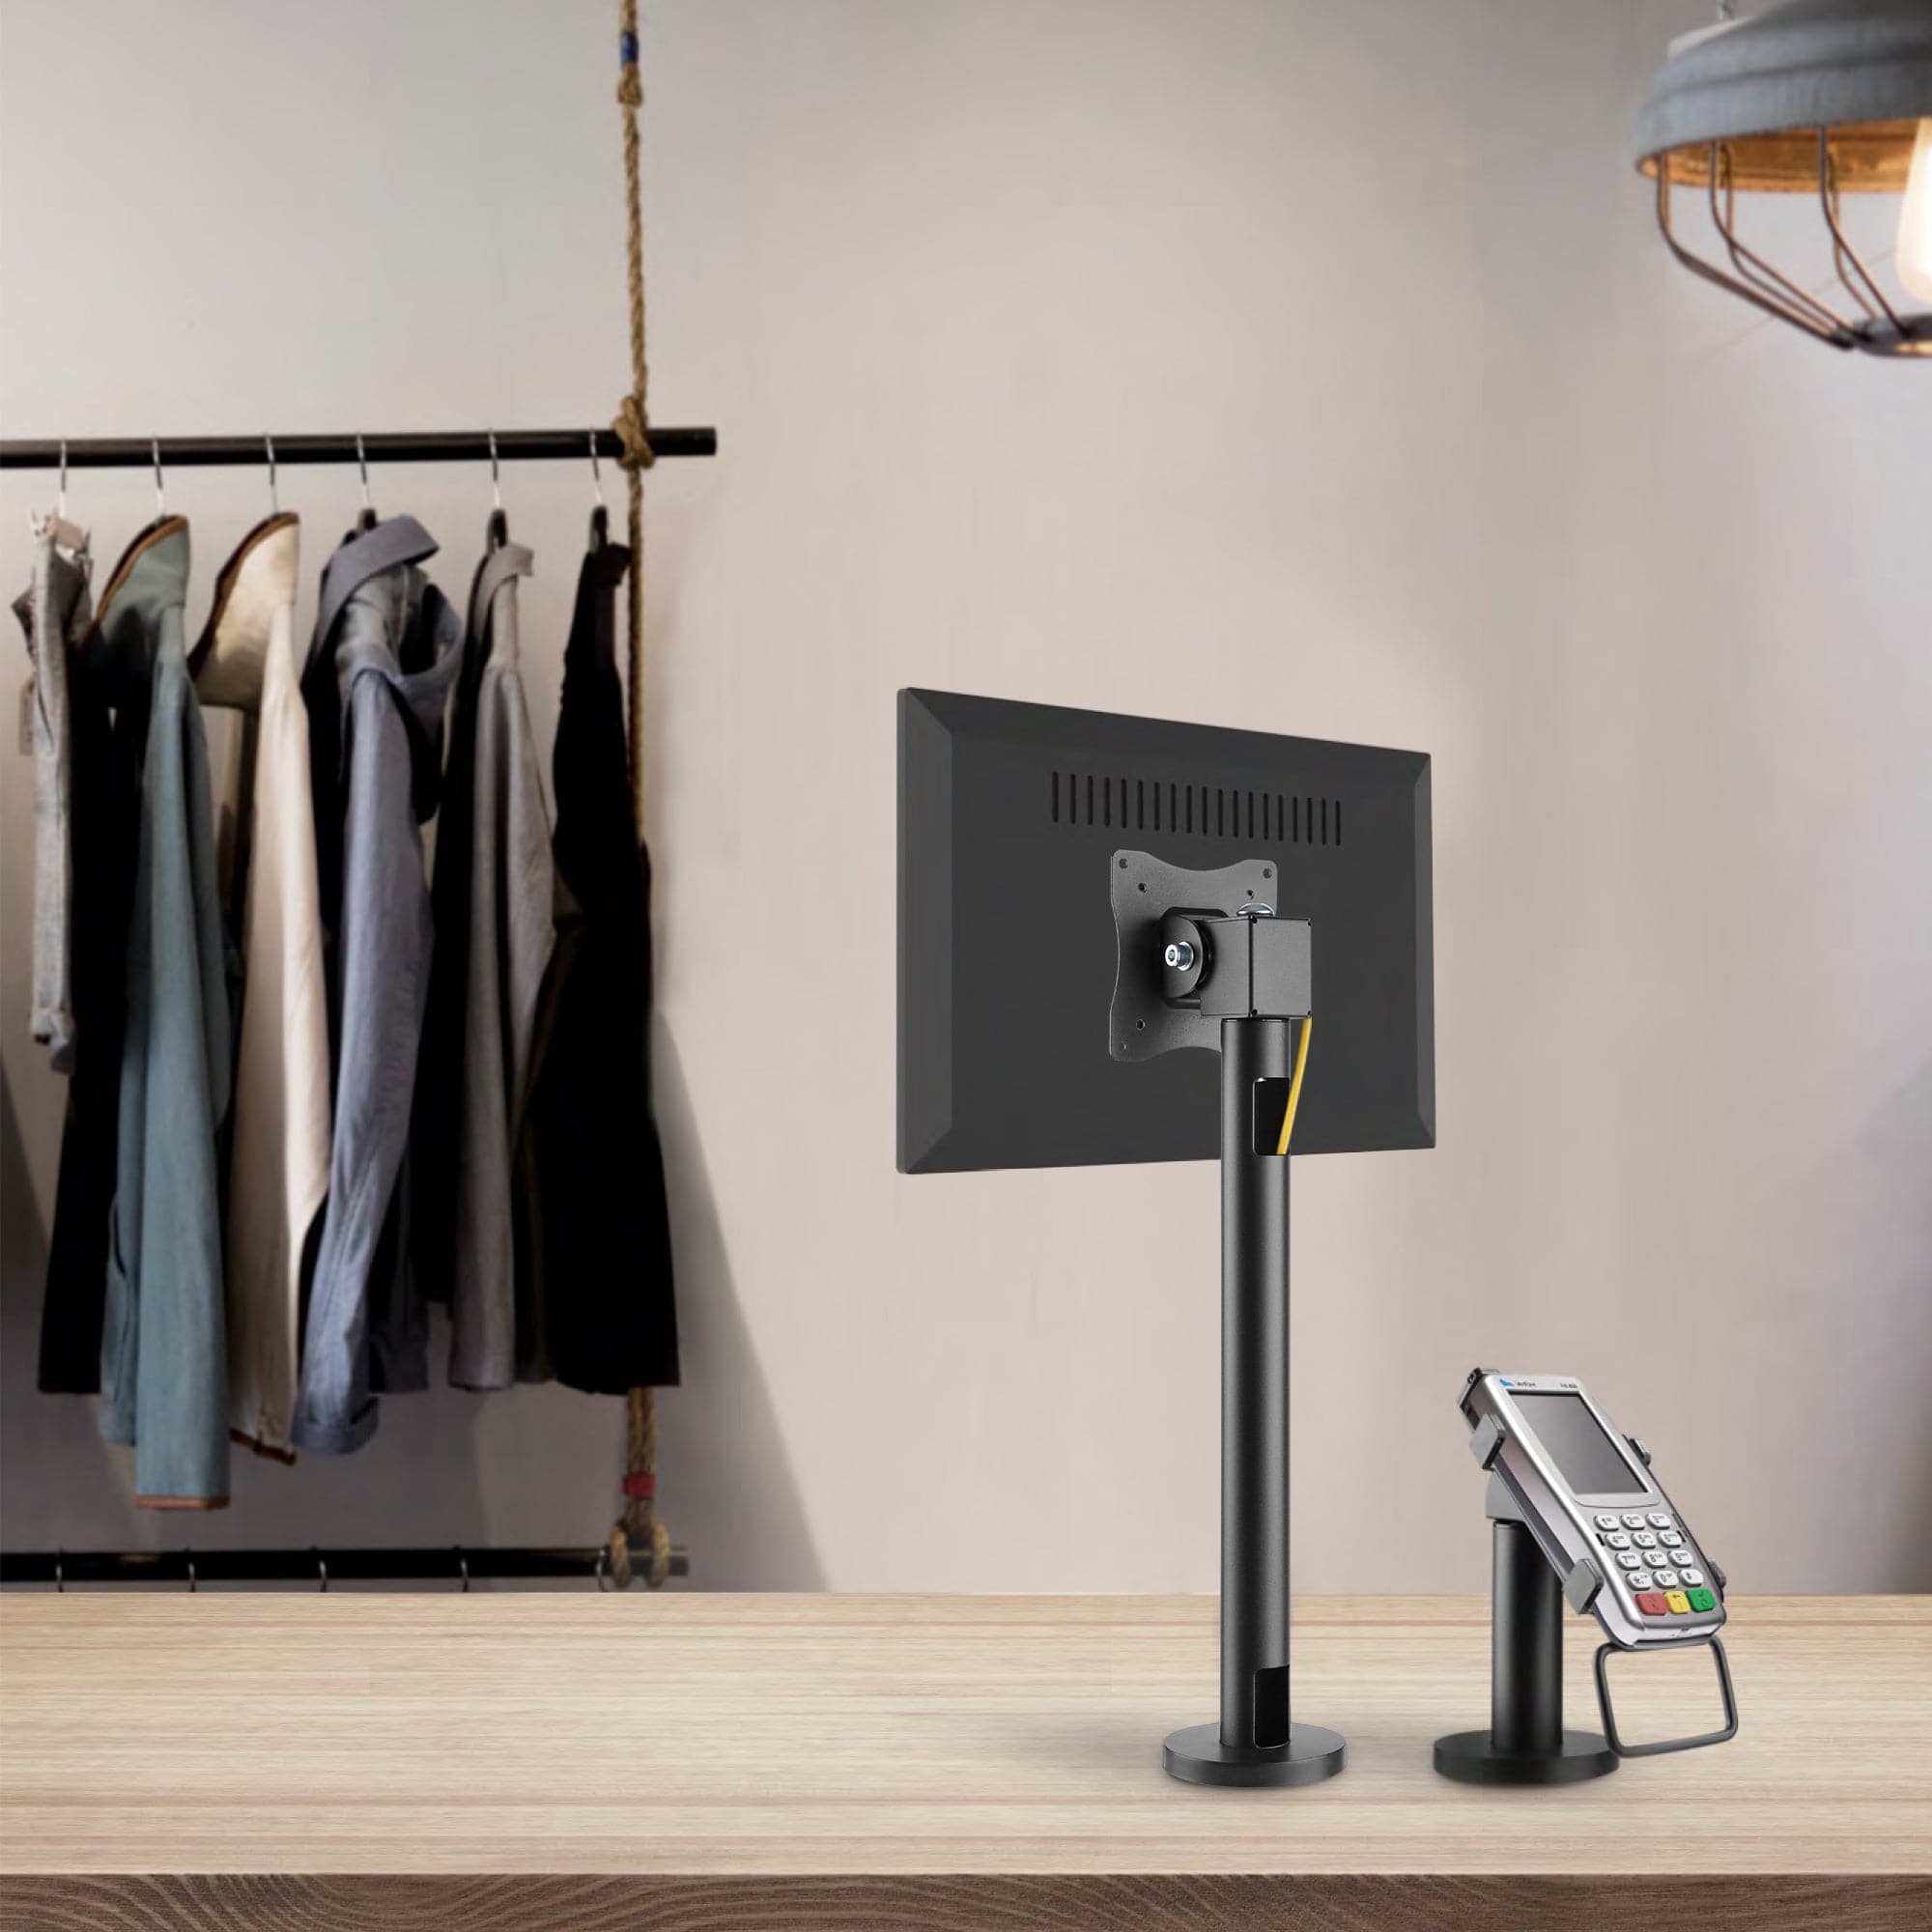 Point of Sale (POS) Monitor Mount - Mount-It!